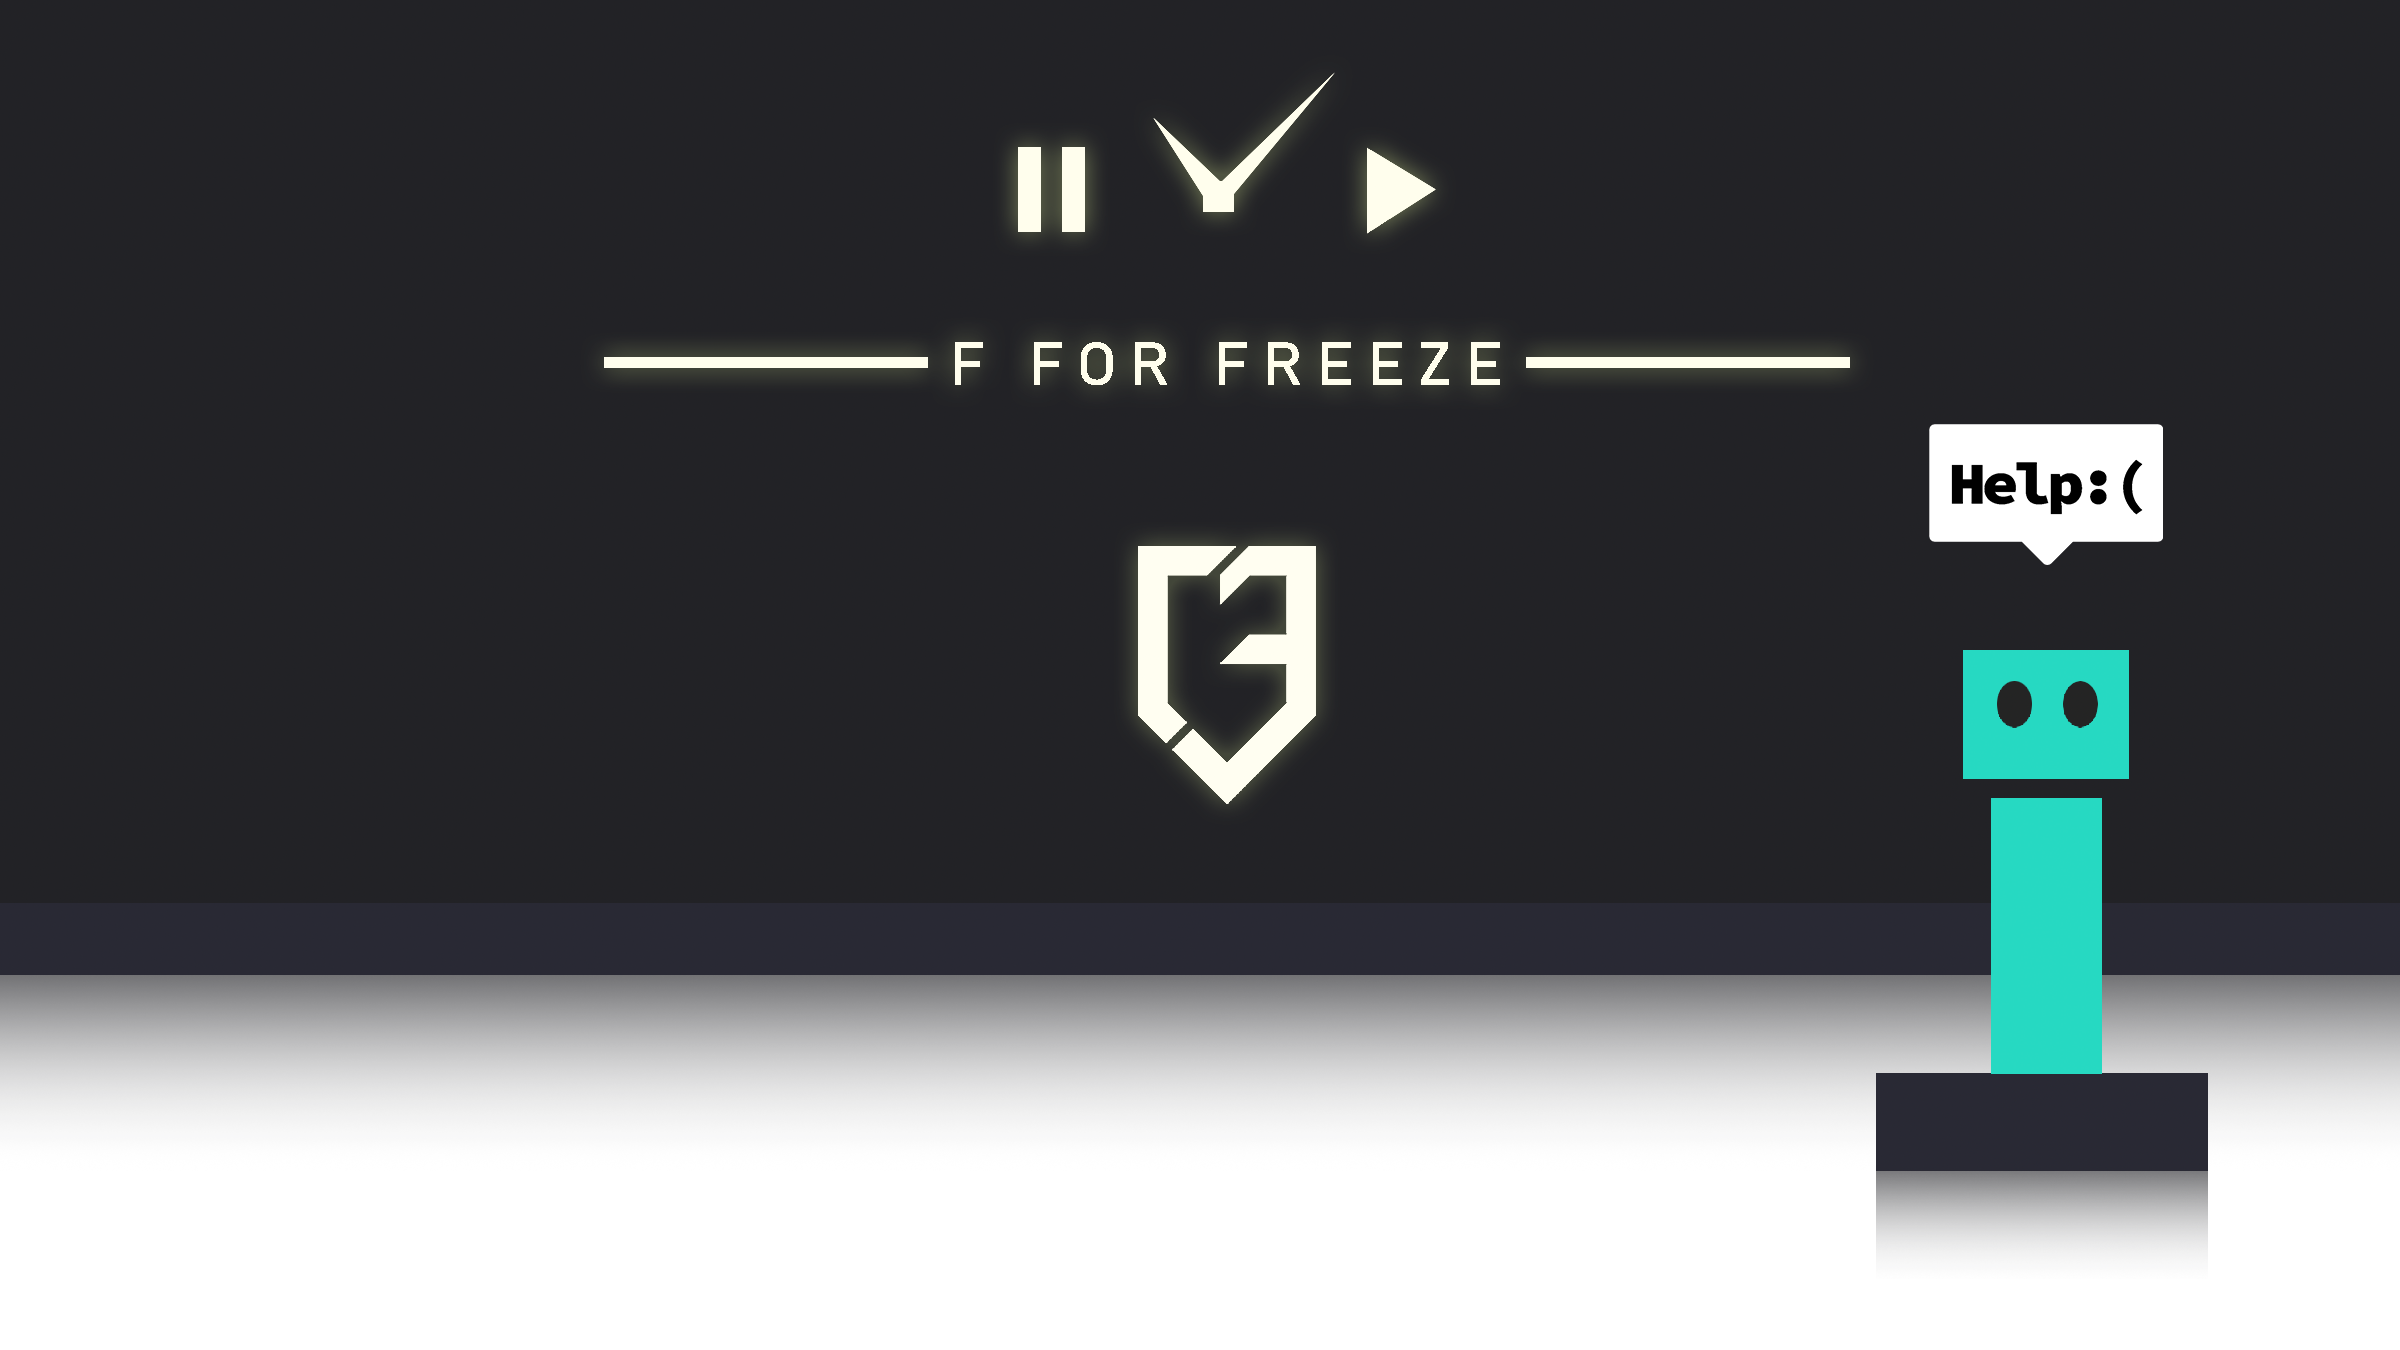 F FOR FREEZE